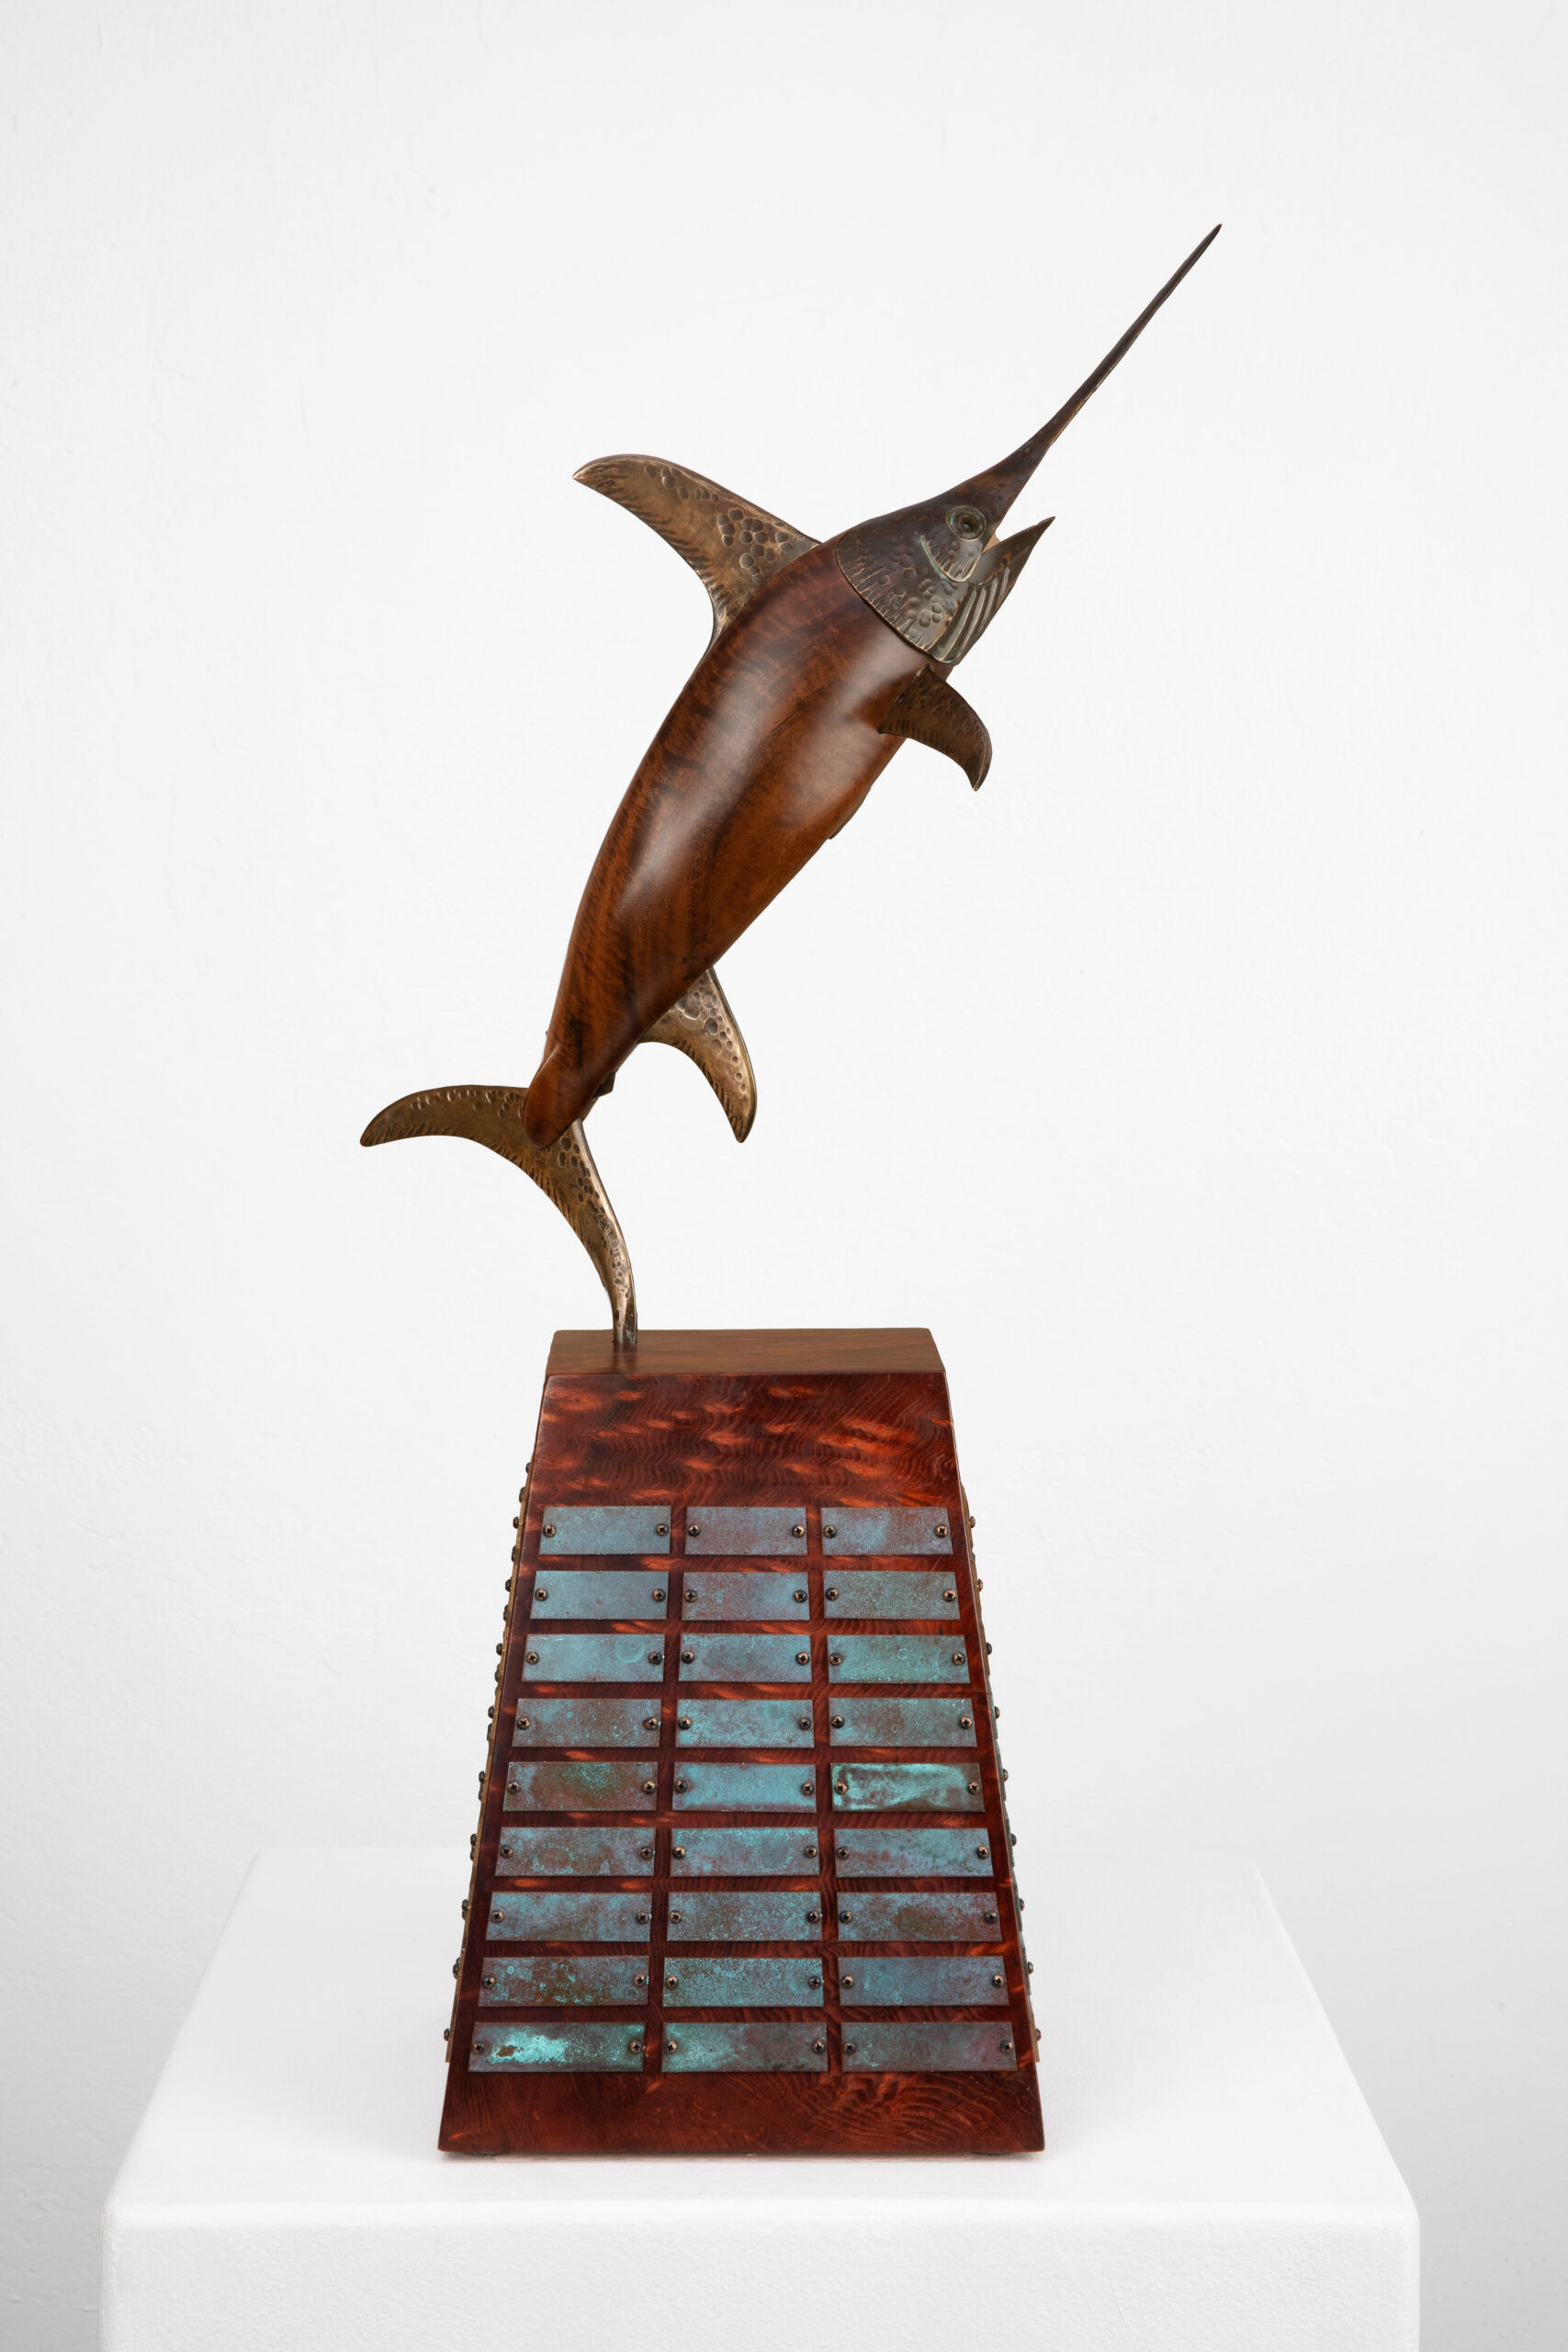 Carved walnut and bronze swordfish perpetual trophy for Tuna Club on Catalina Island